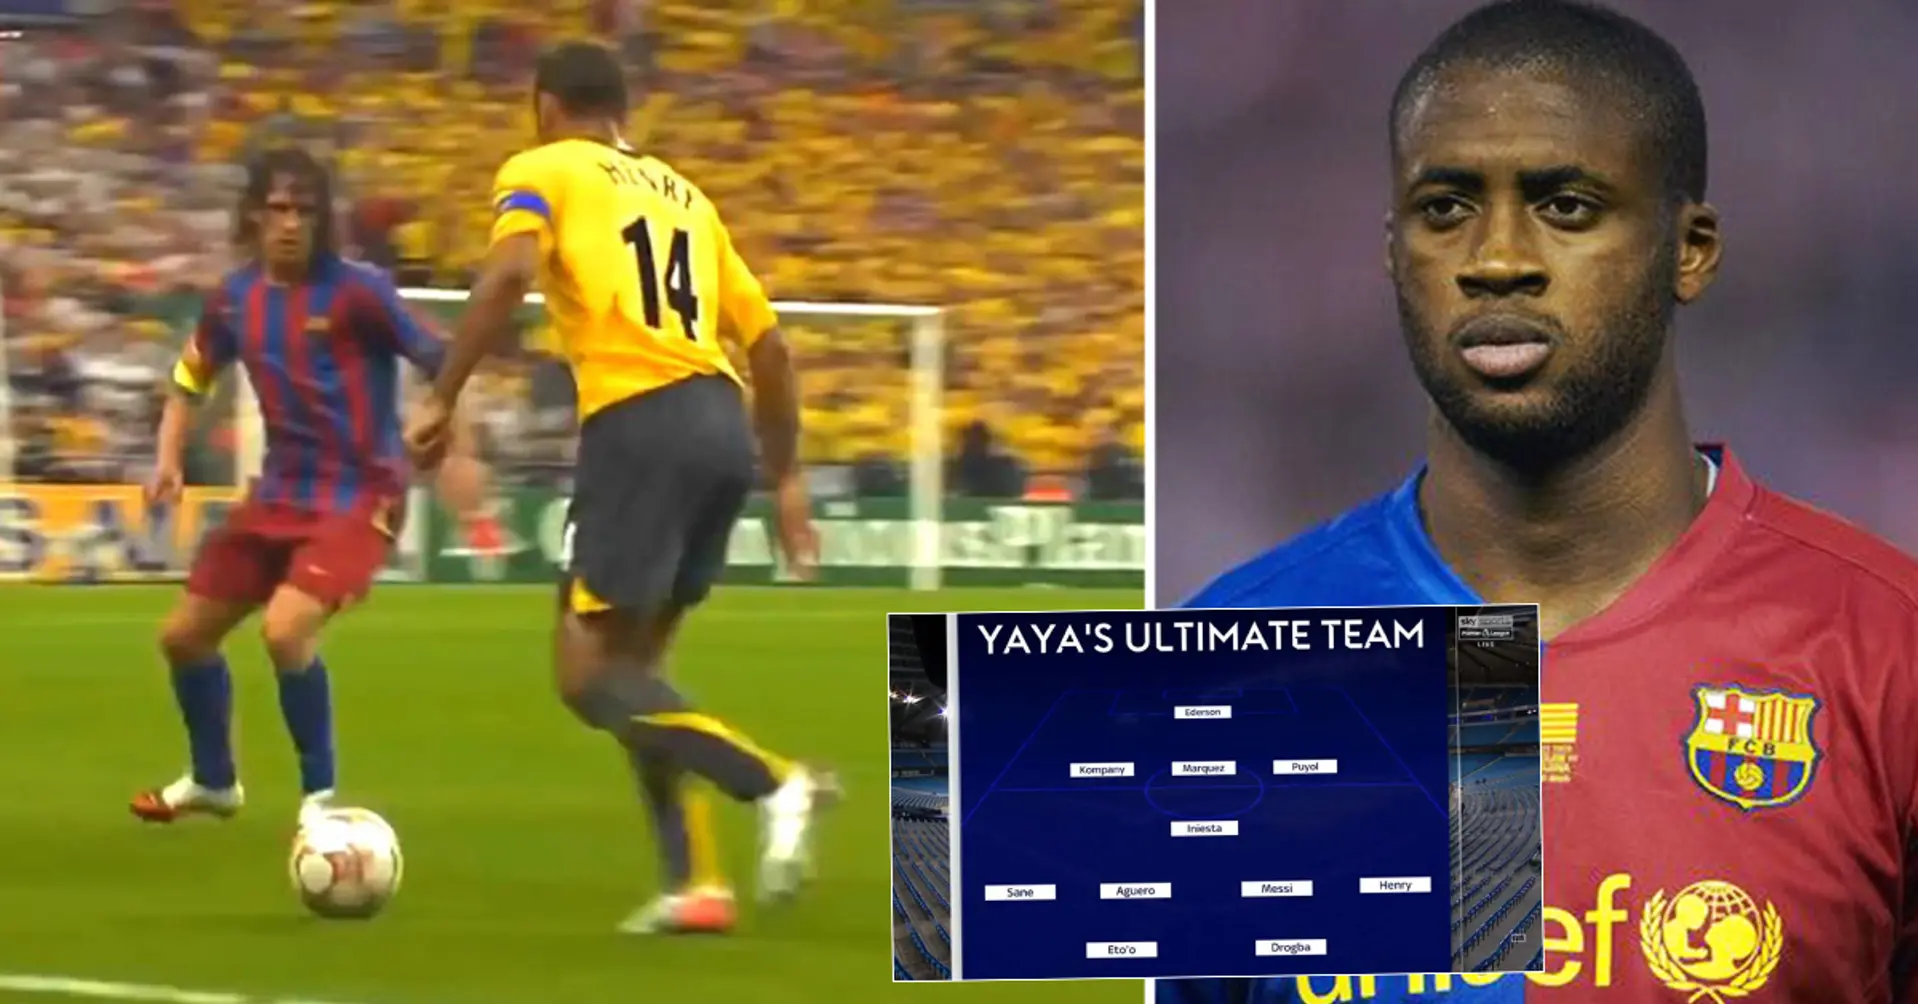 Yaya Toure's Ultimate Team is honestly insane – 6 forwards, 3 defenders and just ONE midfielder